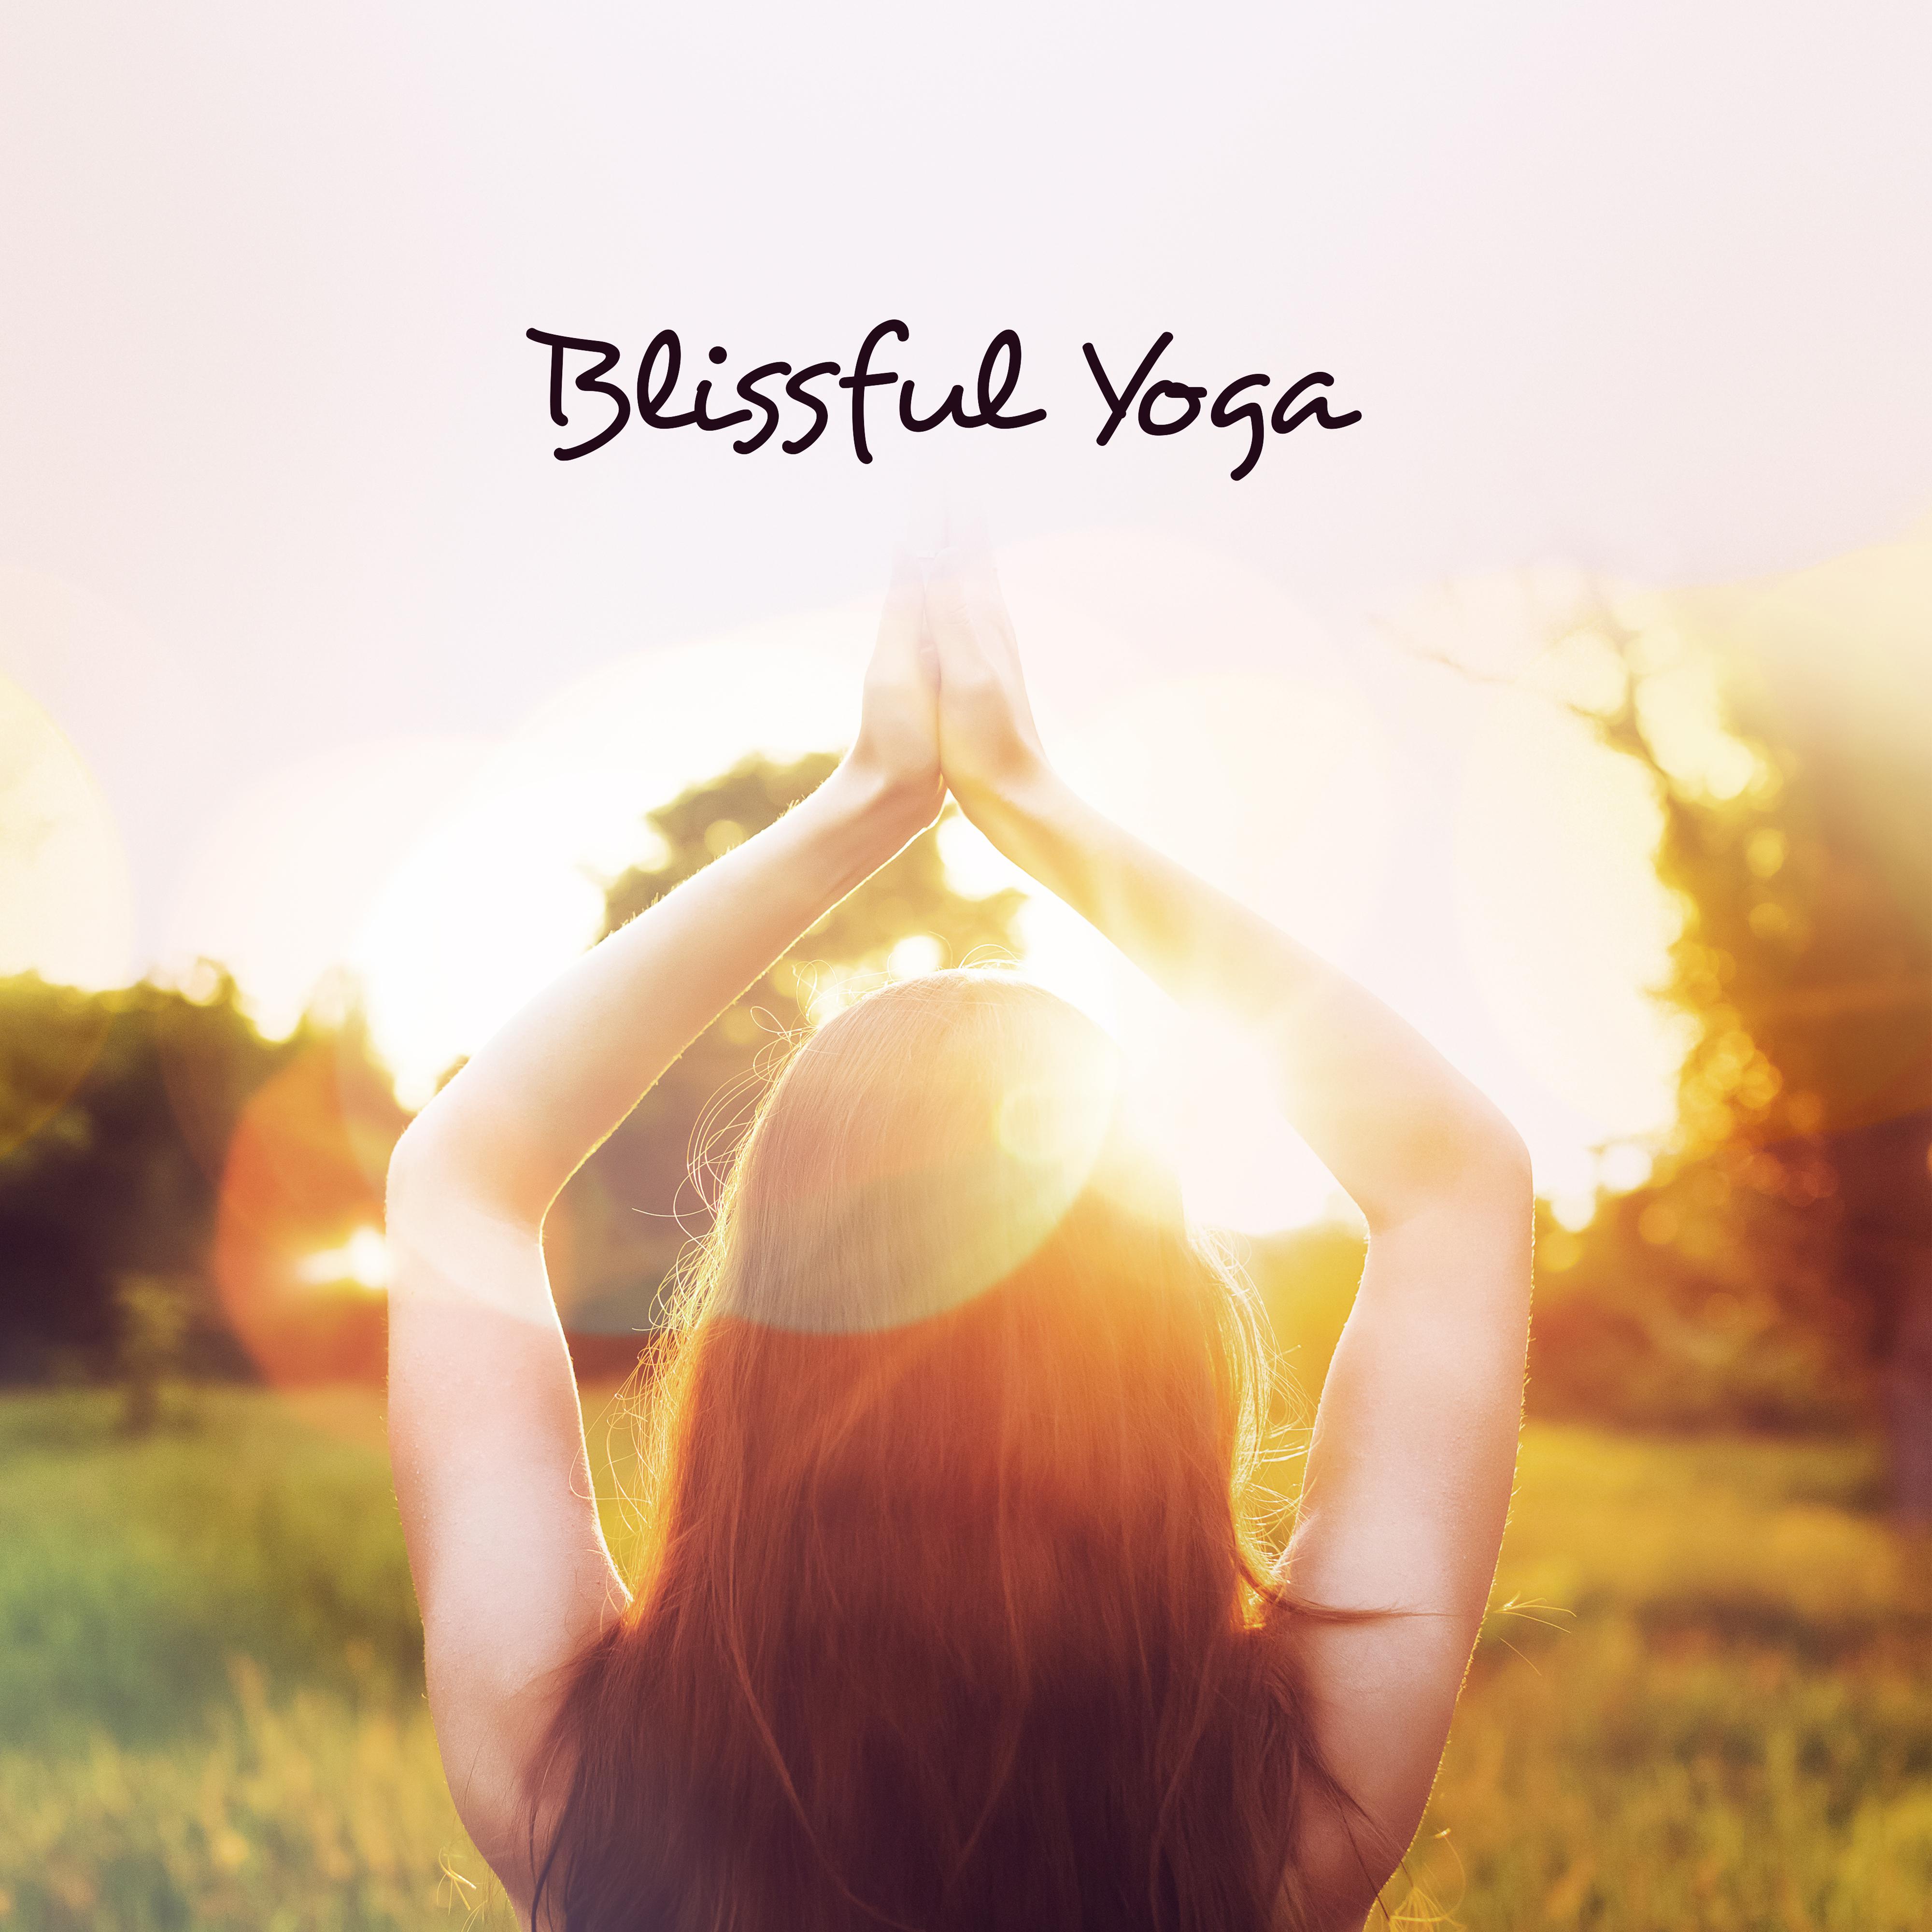 Blissful Yoga - Mindfulness Ambient Sounds, Deep Meditation for Relaxation, Mellow Songs for Yoga, Deeper Sleep, Stress Relief